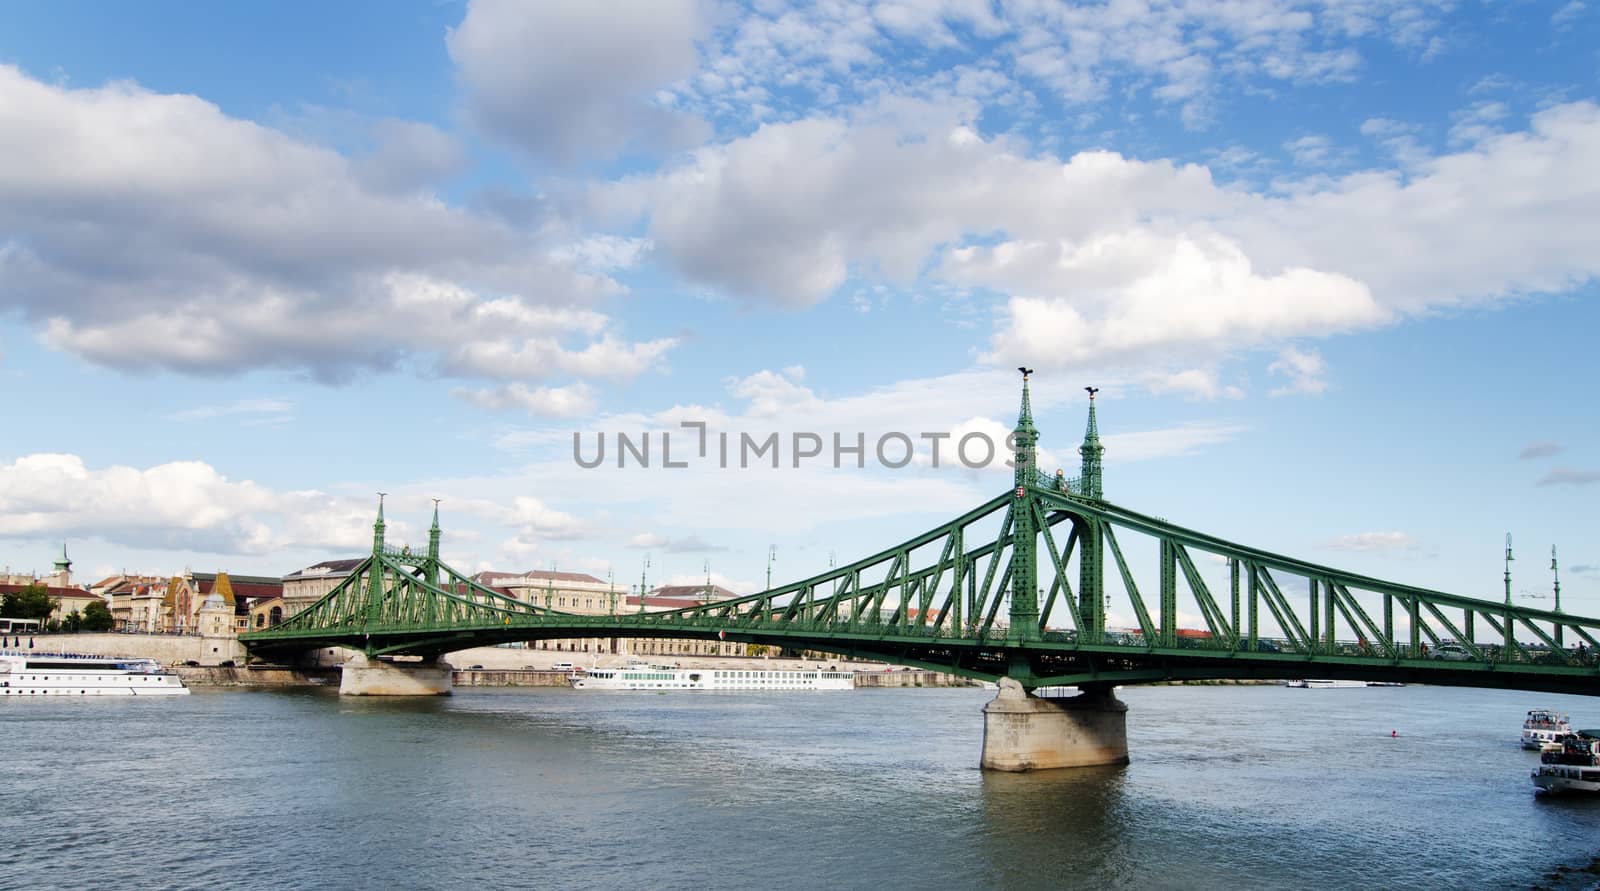 Szabadsag hid - Liberty bridge in Budapest, Hungary by sarkao